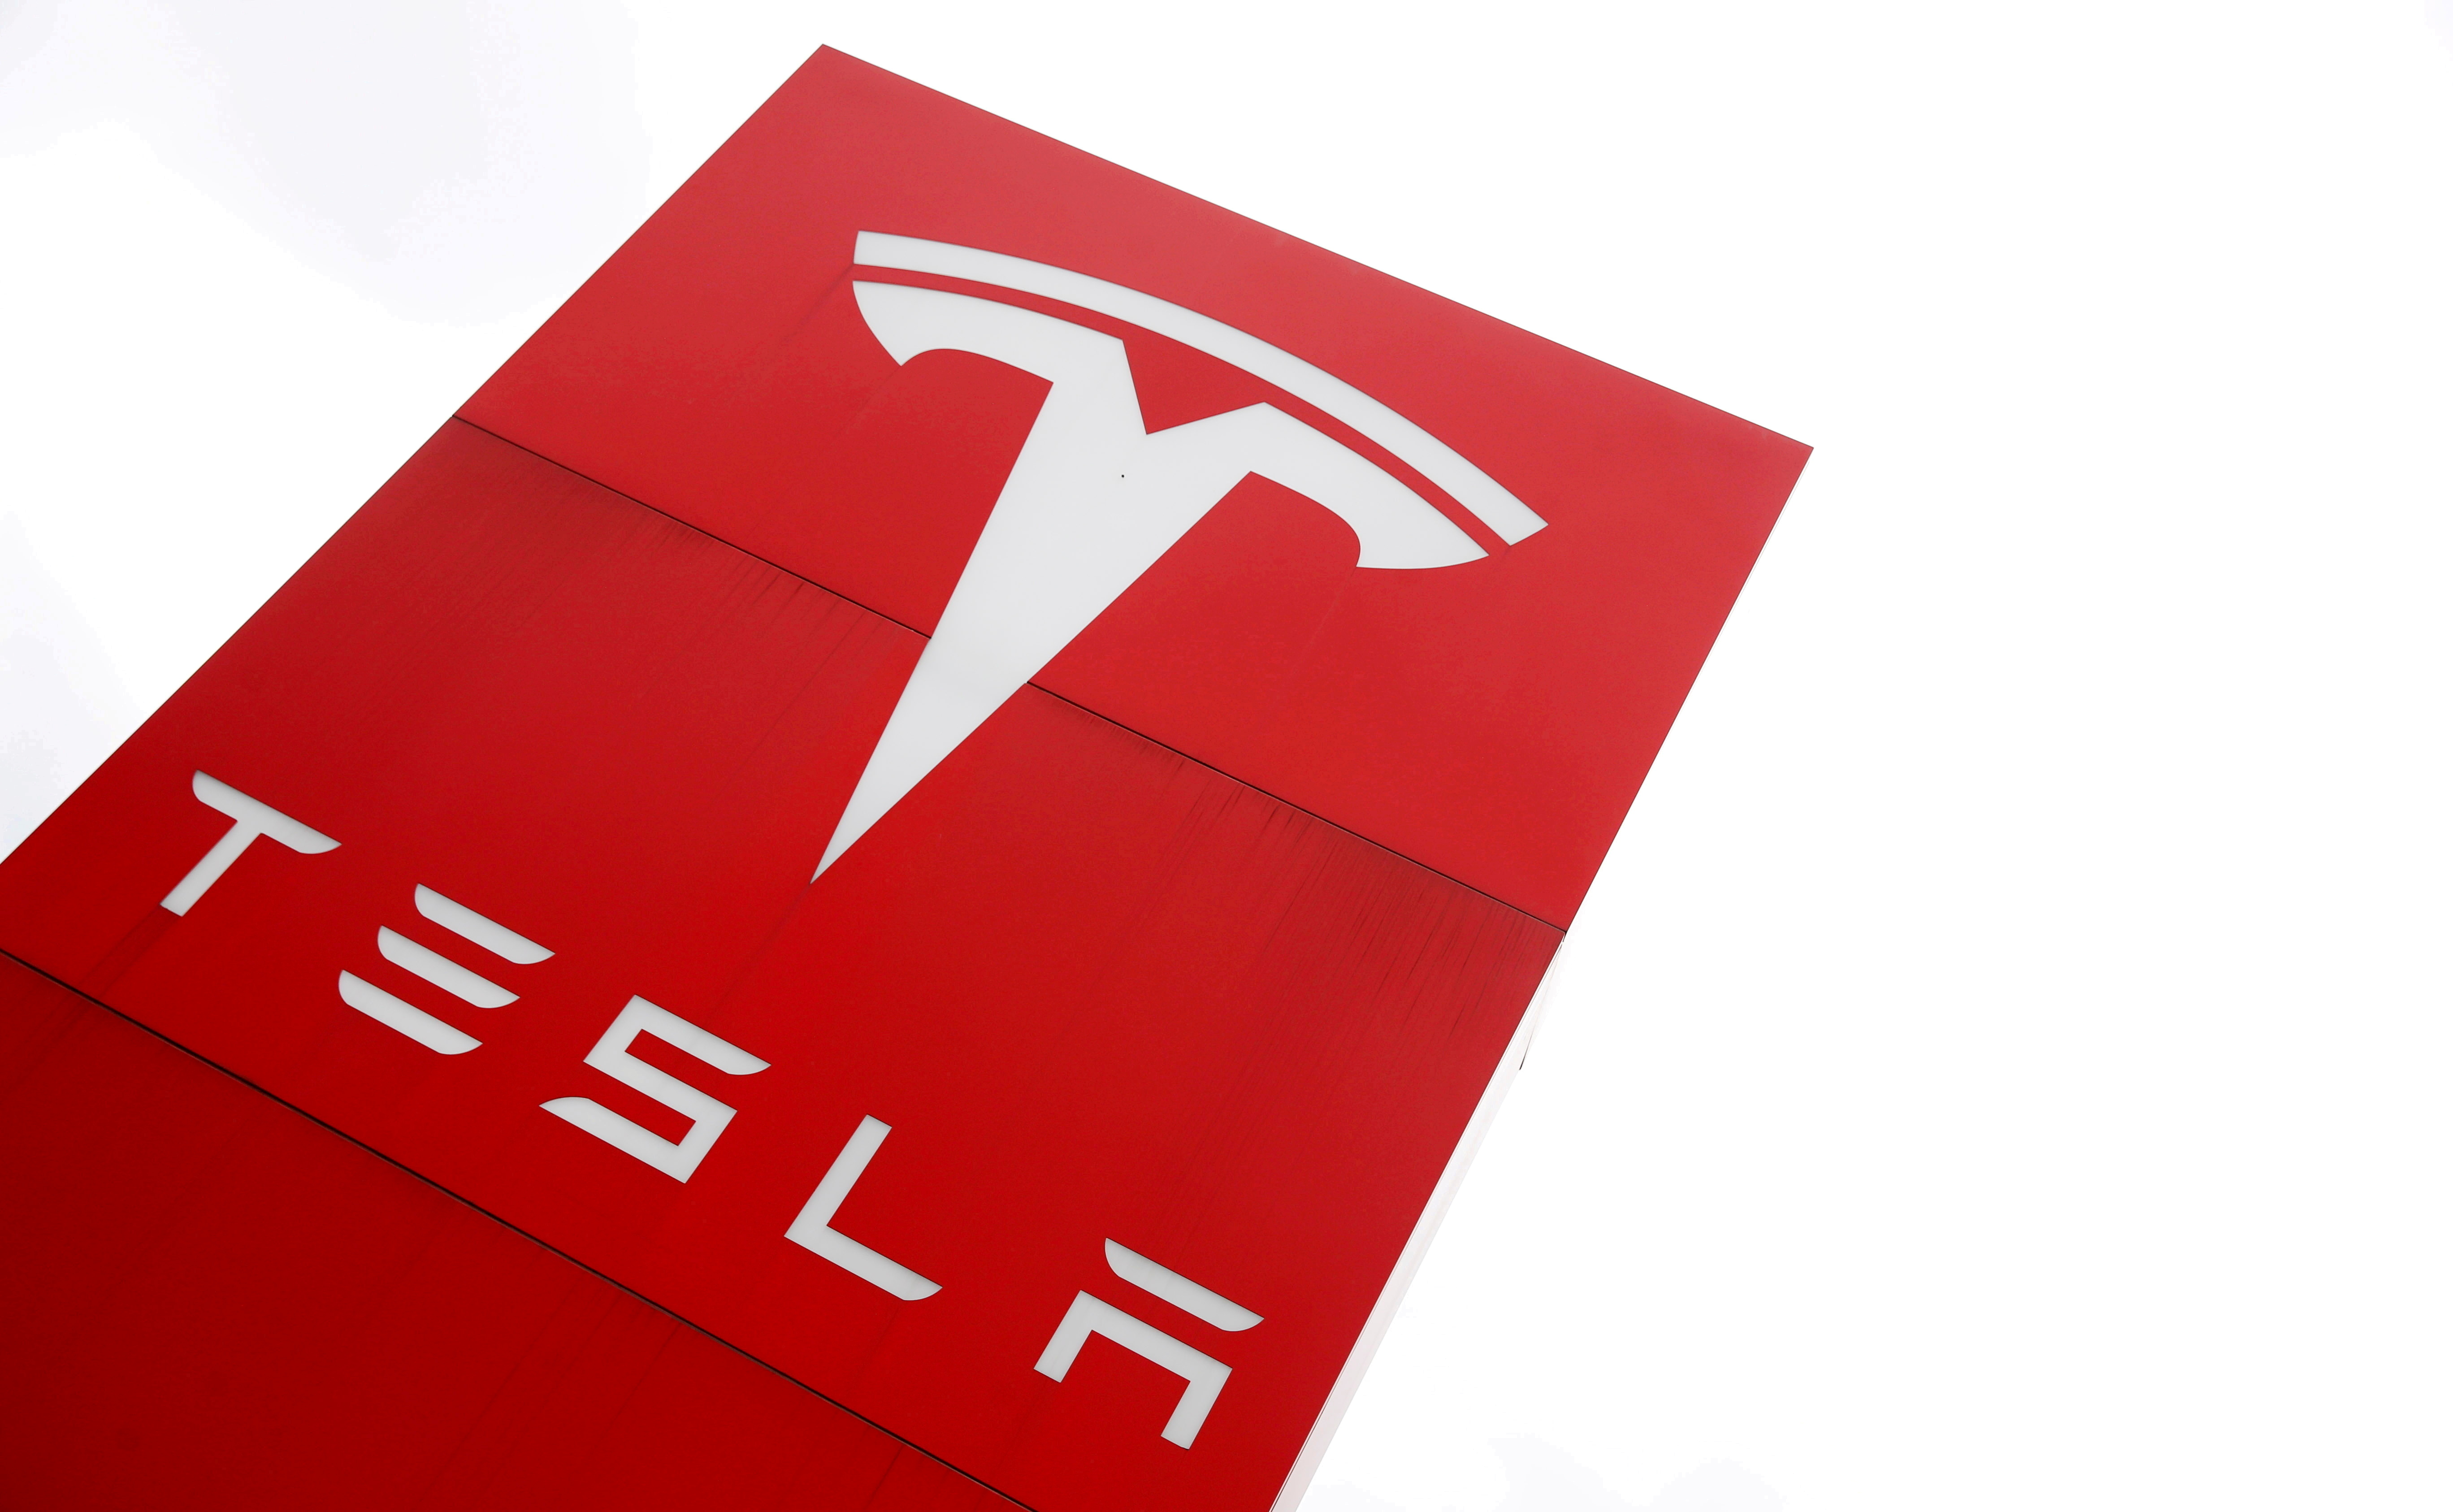 The logo of car manufacturer Tesla is seen at a dealership in London, Britain, May 14, 2021. REUTERS/Matthew Childs